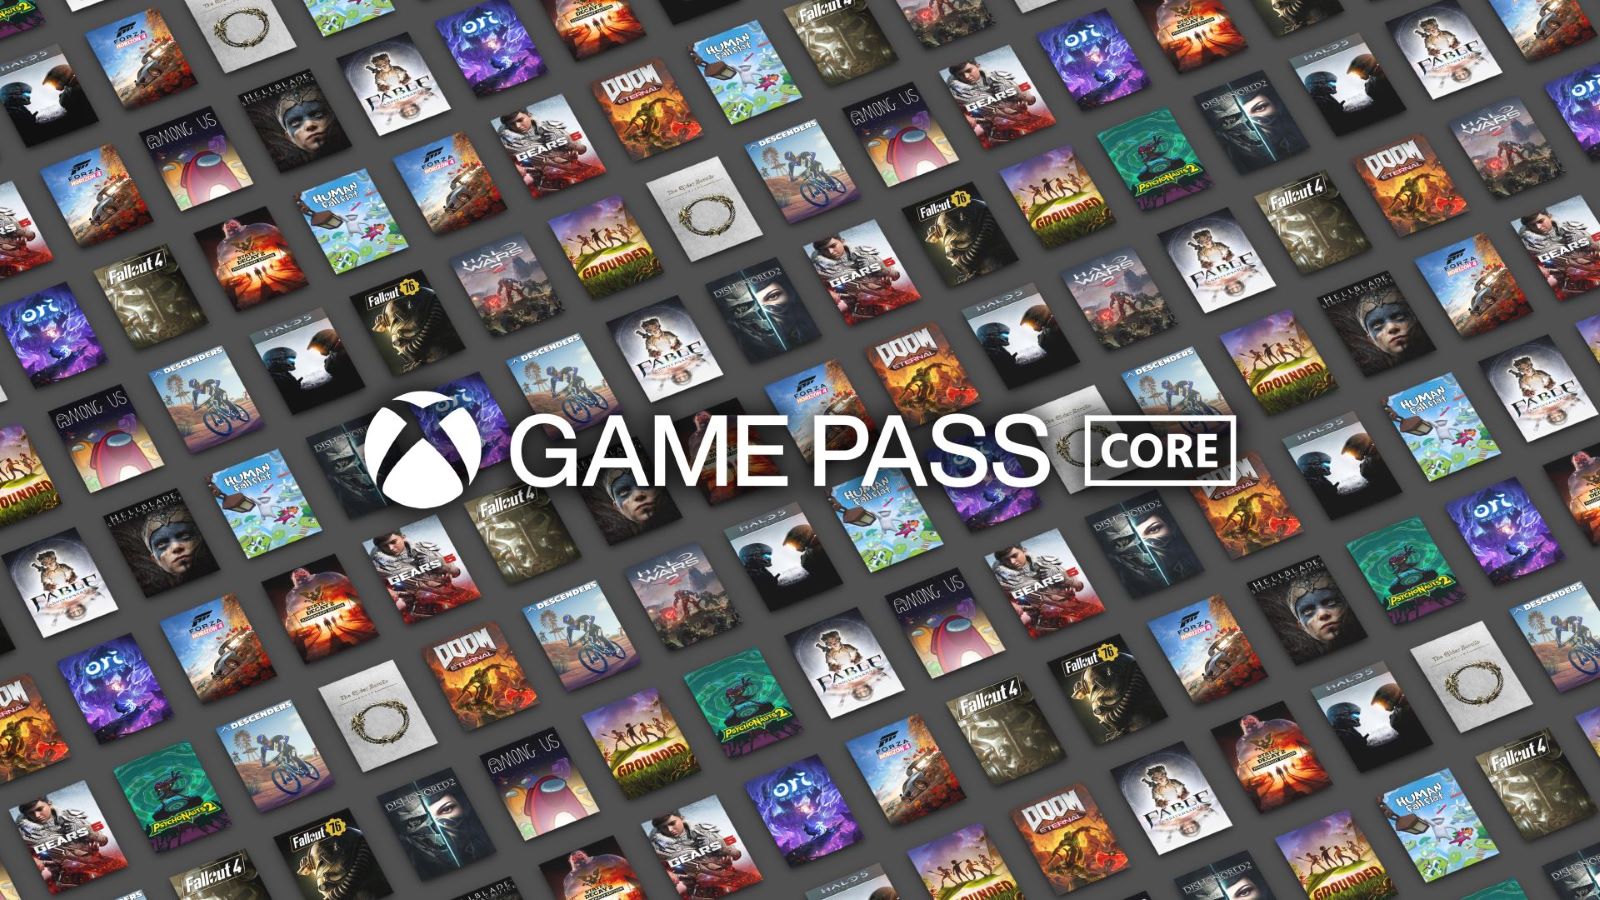 Xbox Game Pass for PC is Great for Players with Older Builds